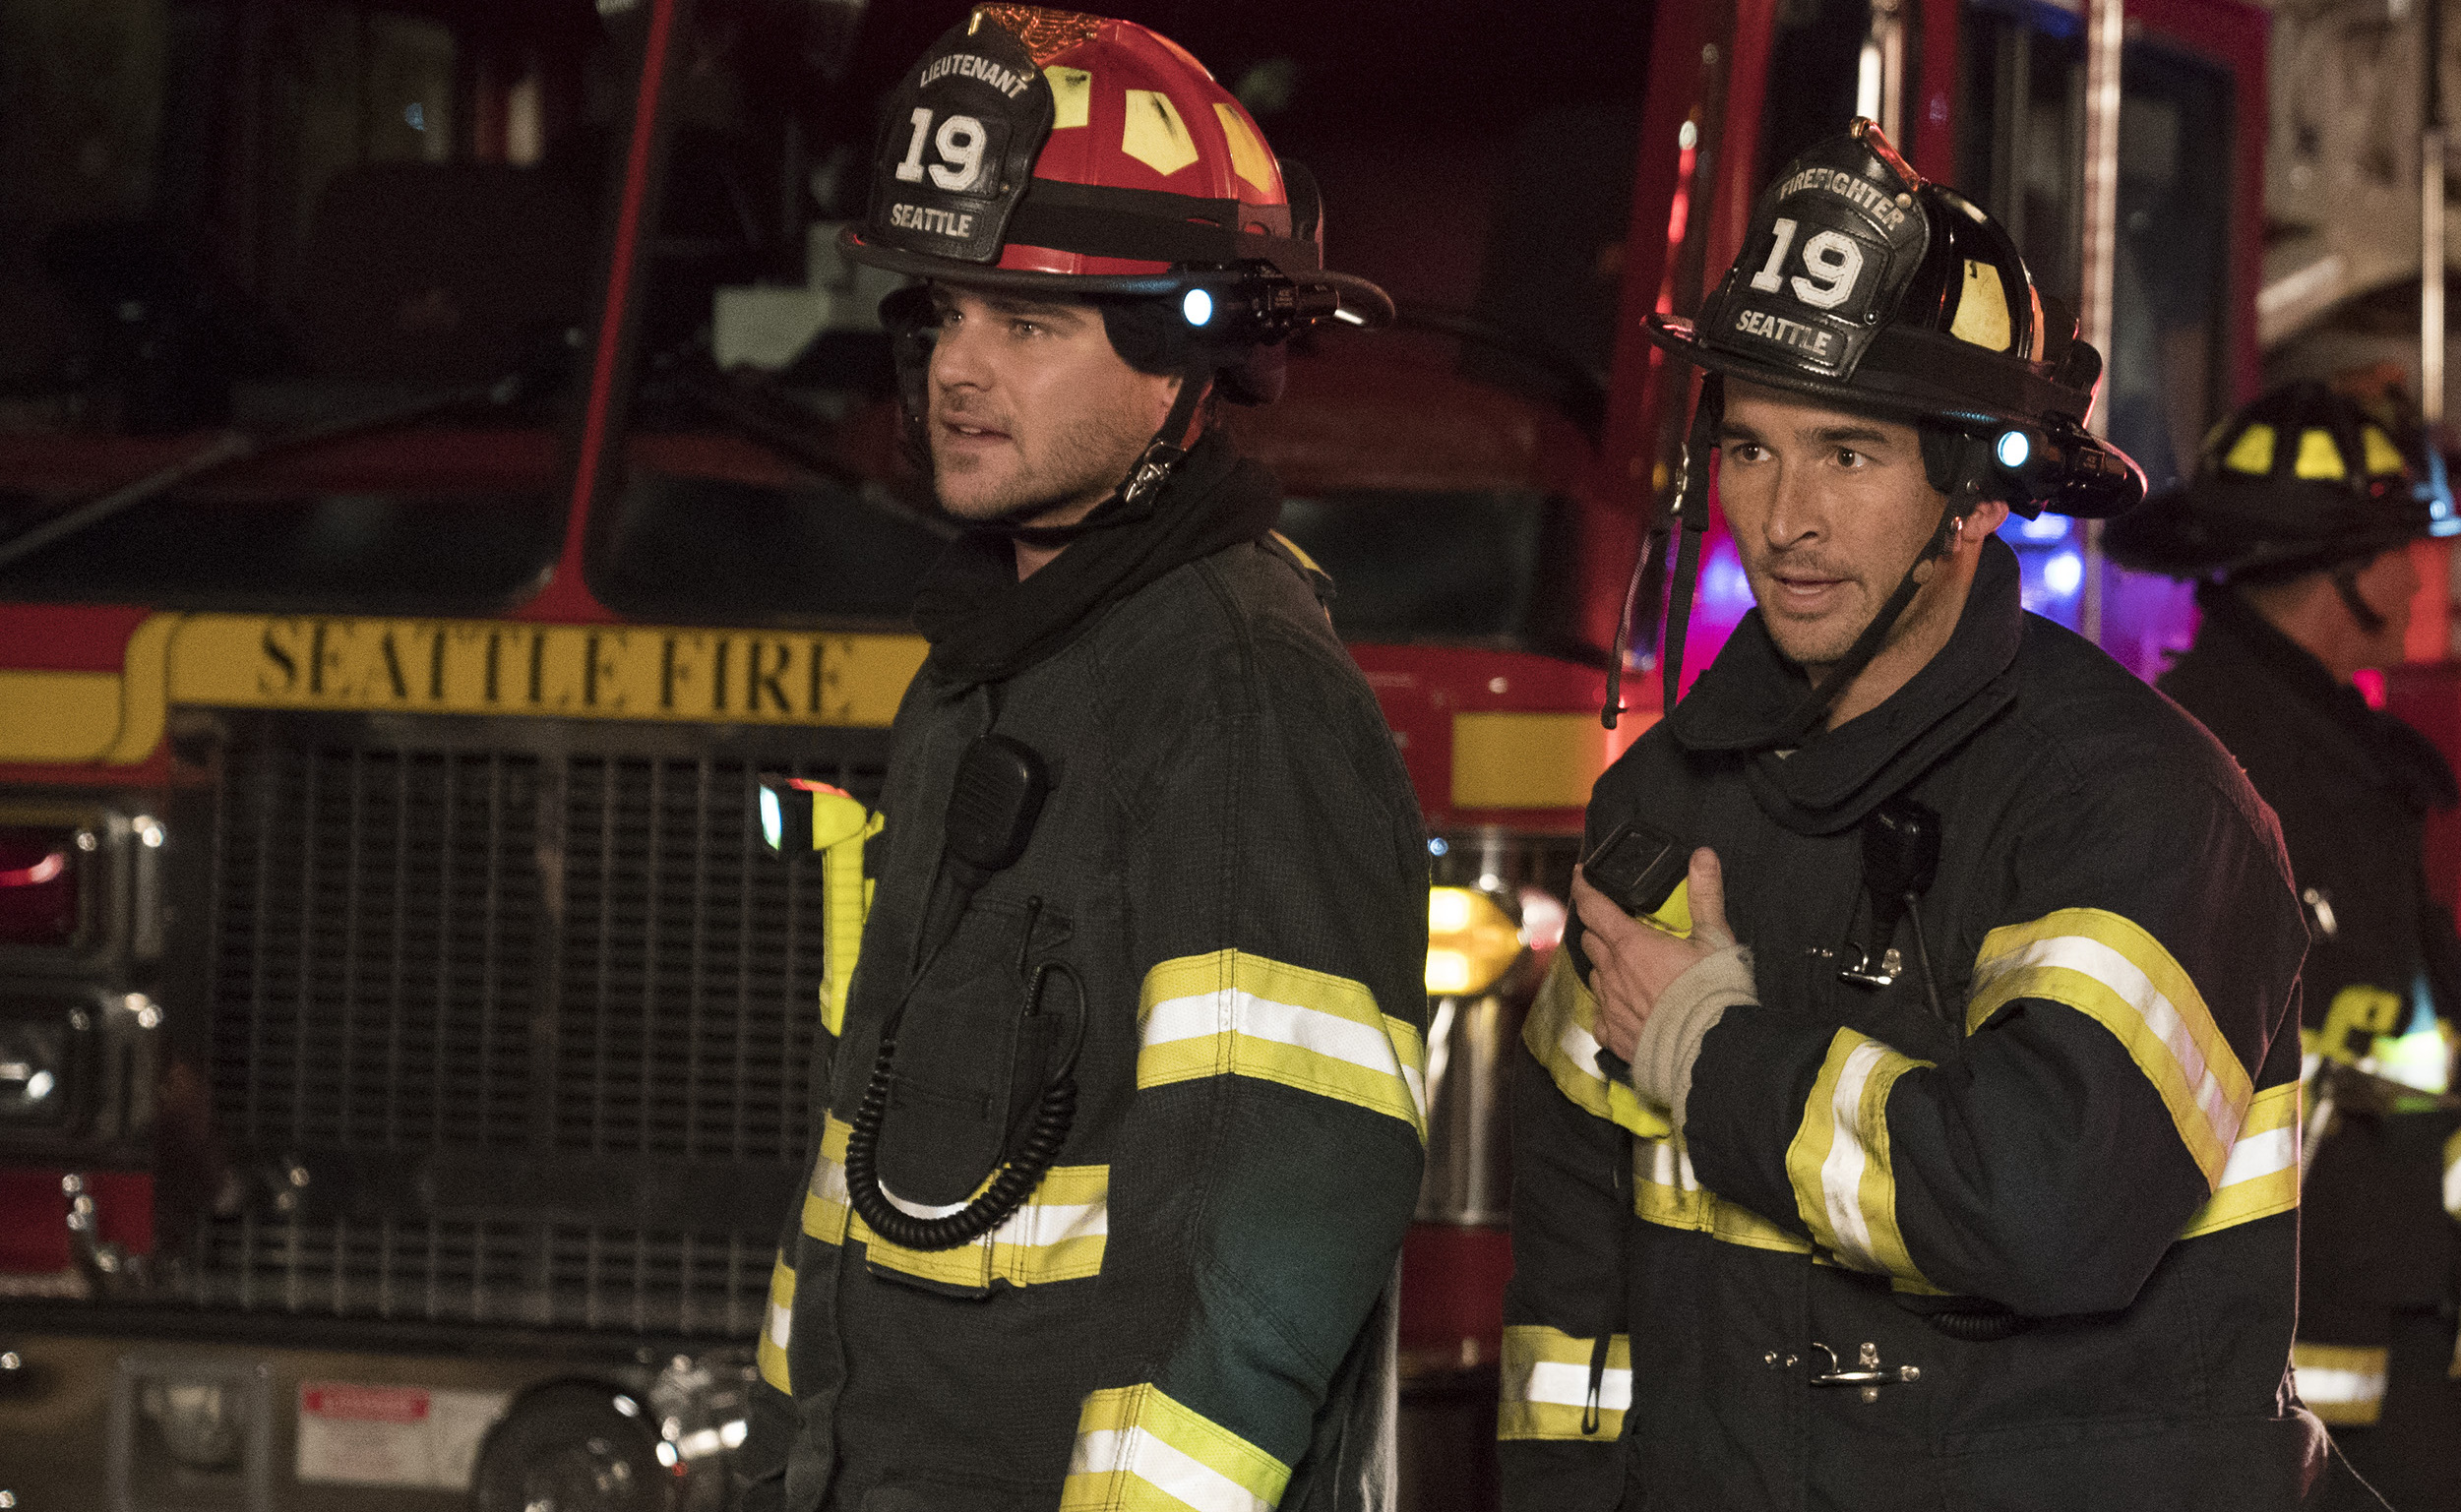 The Station 19 Trailer Proves That the Grey's SpinOff Will Be a Hit